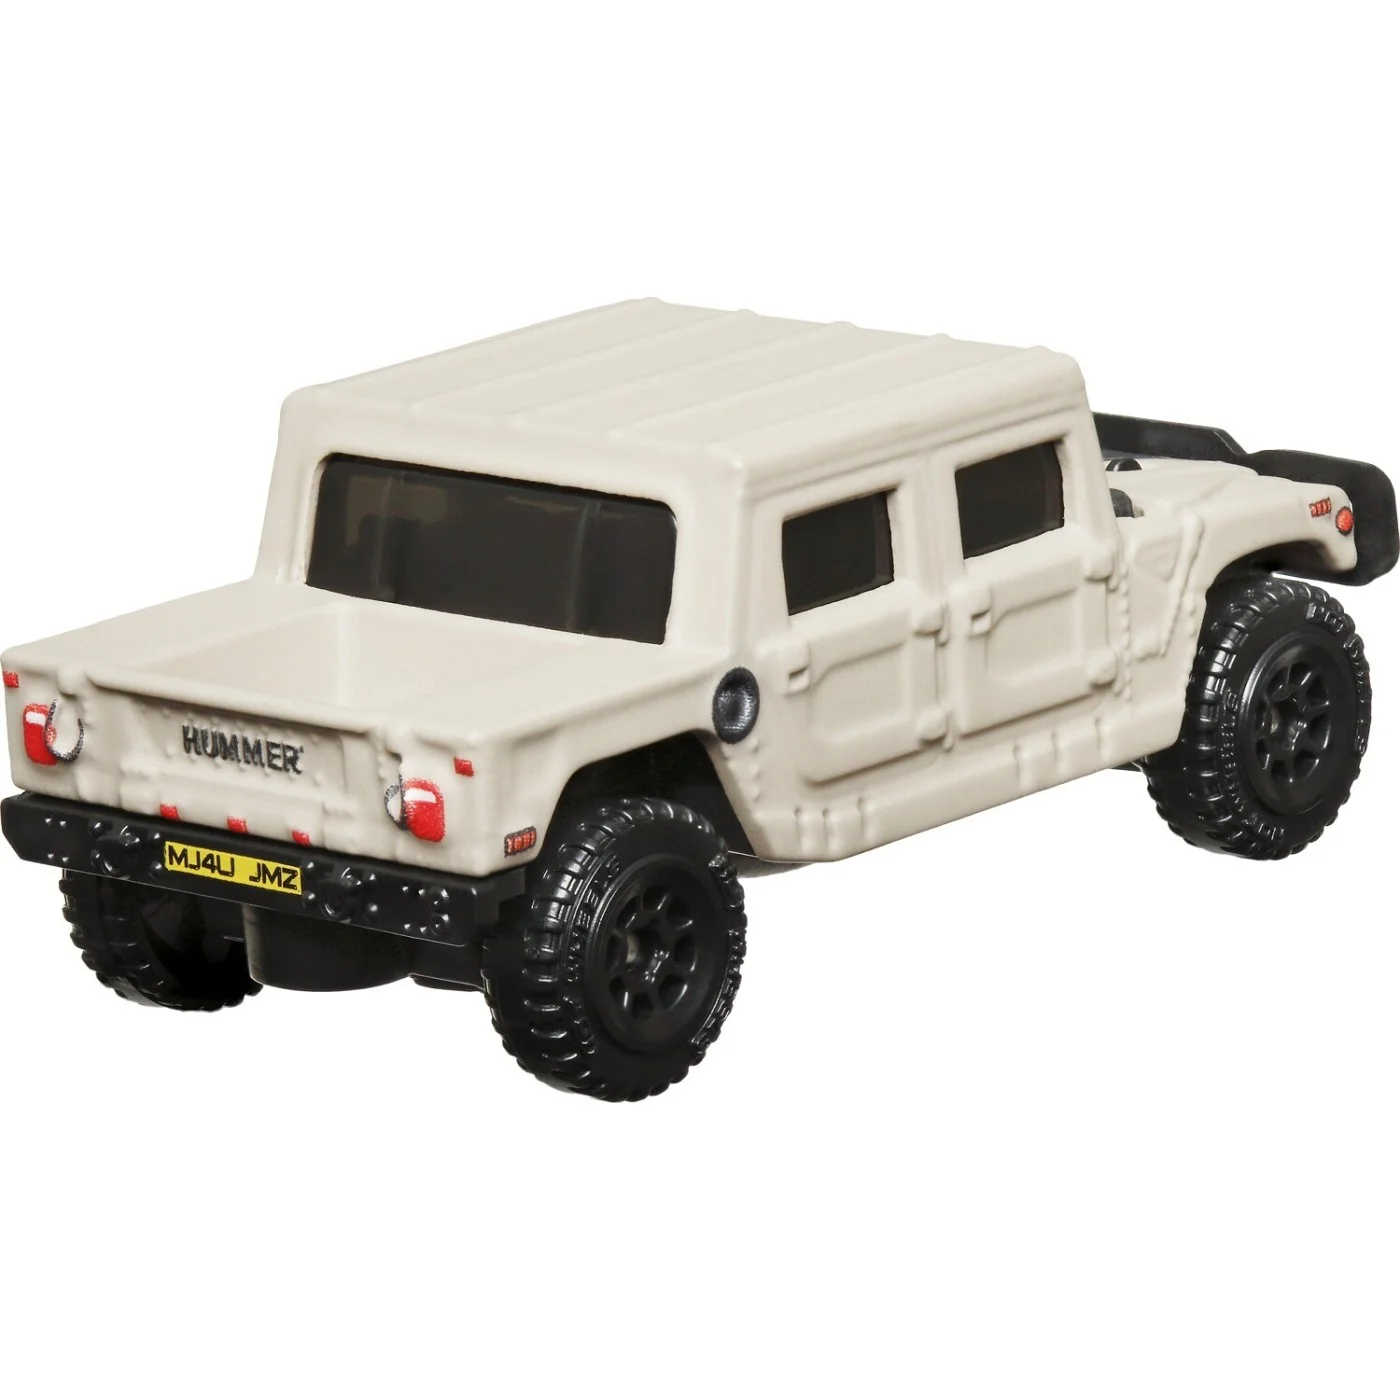 Mattel Hot Wheels - Fast And Furious, Decades of Fast, Hummer H1 5/5 HRW45 (HNR88)